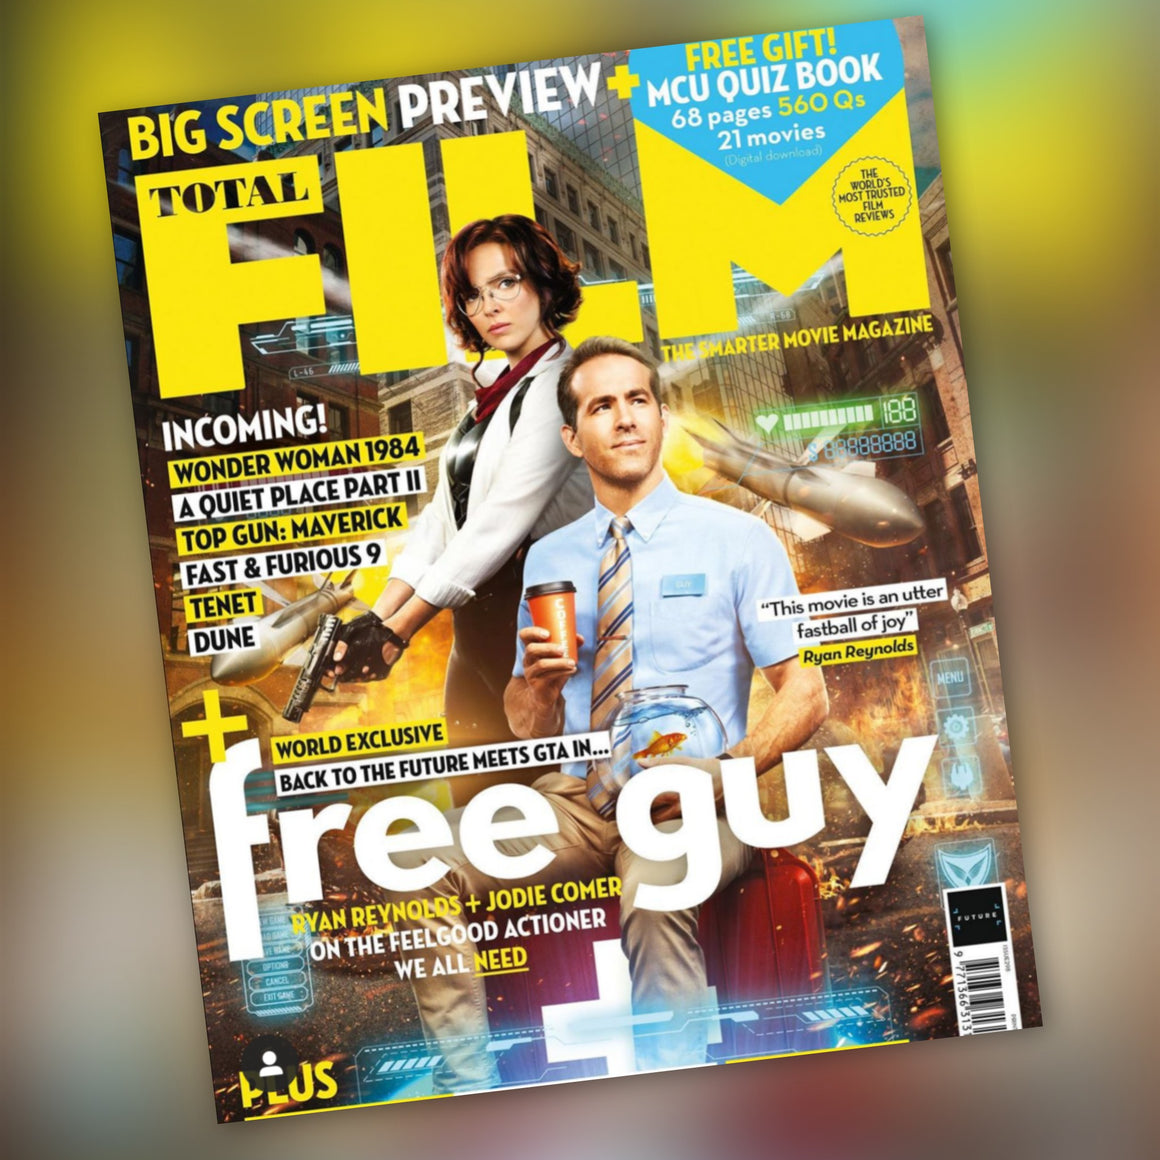 Total Film Magazine May 2020: FREE GUY RYAN REYNOLDS JODIE COMER COVER FEATURE